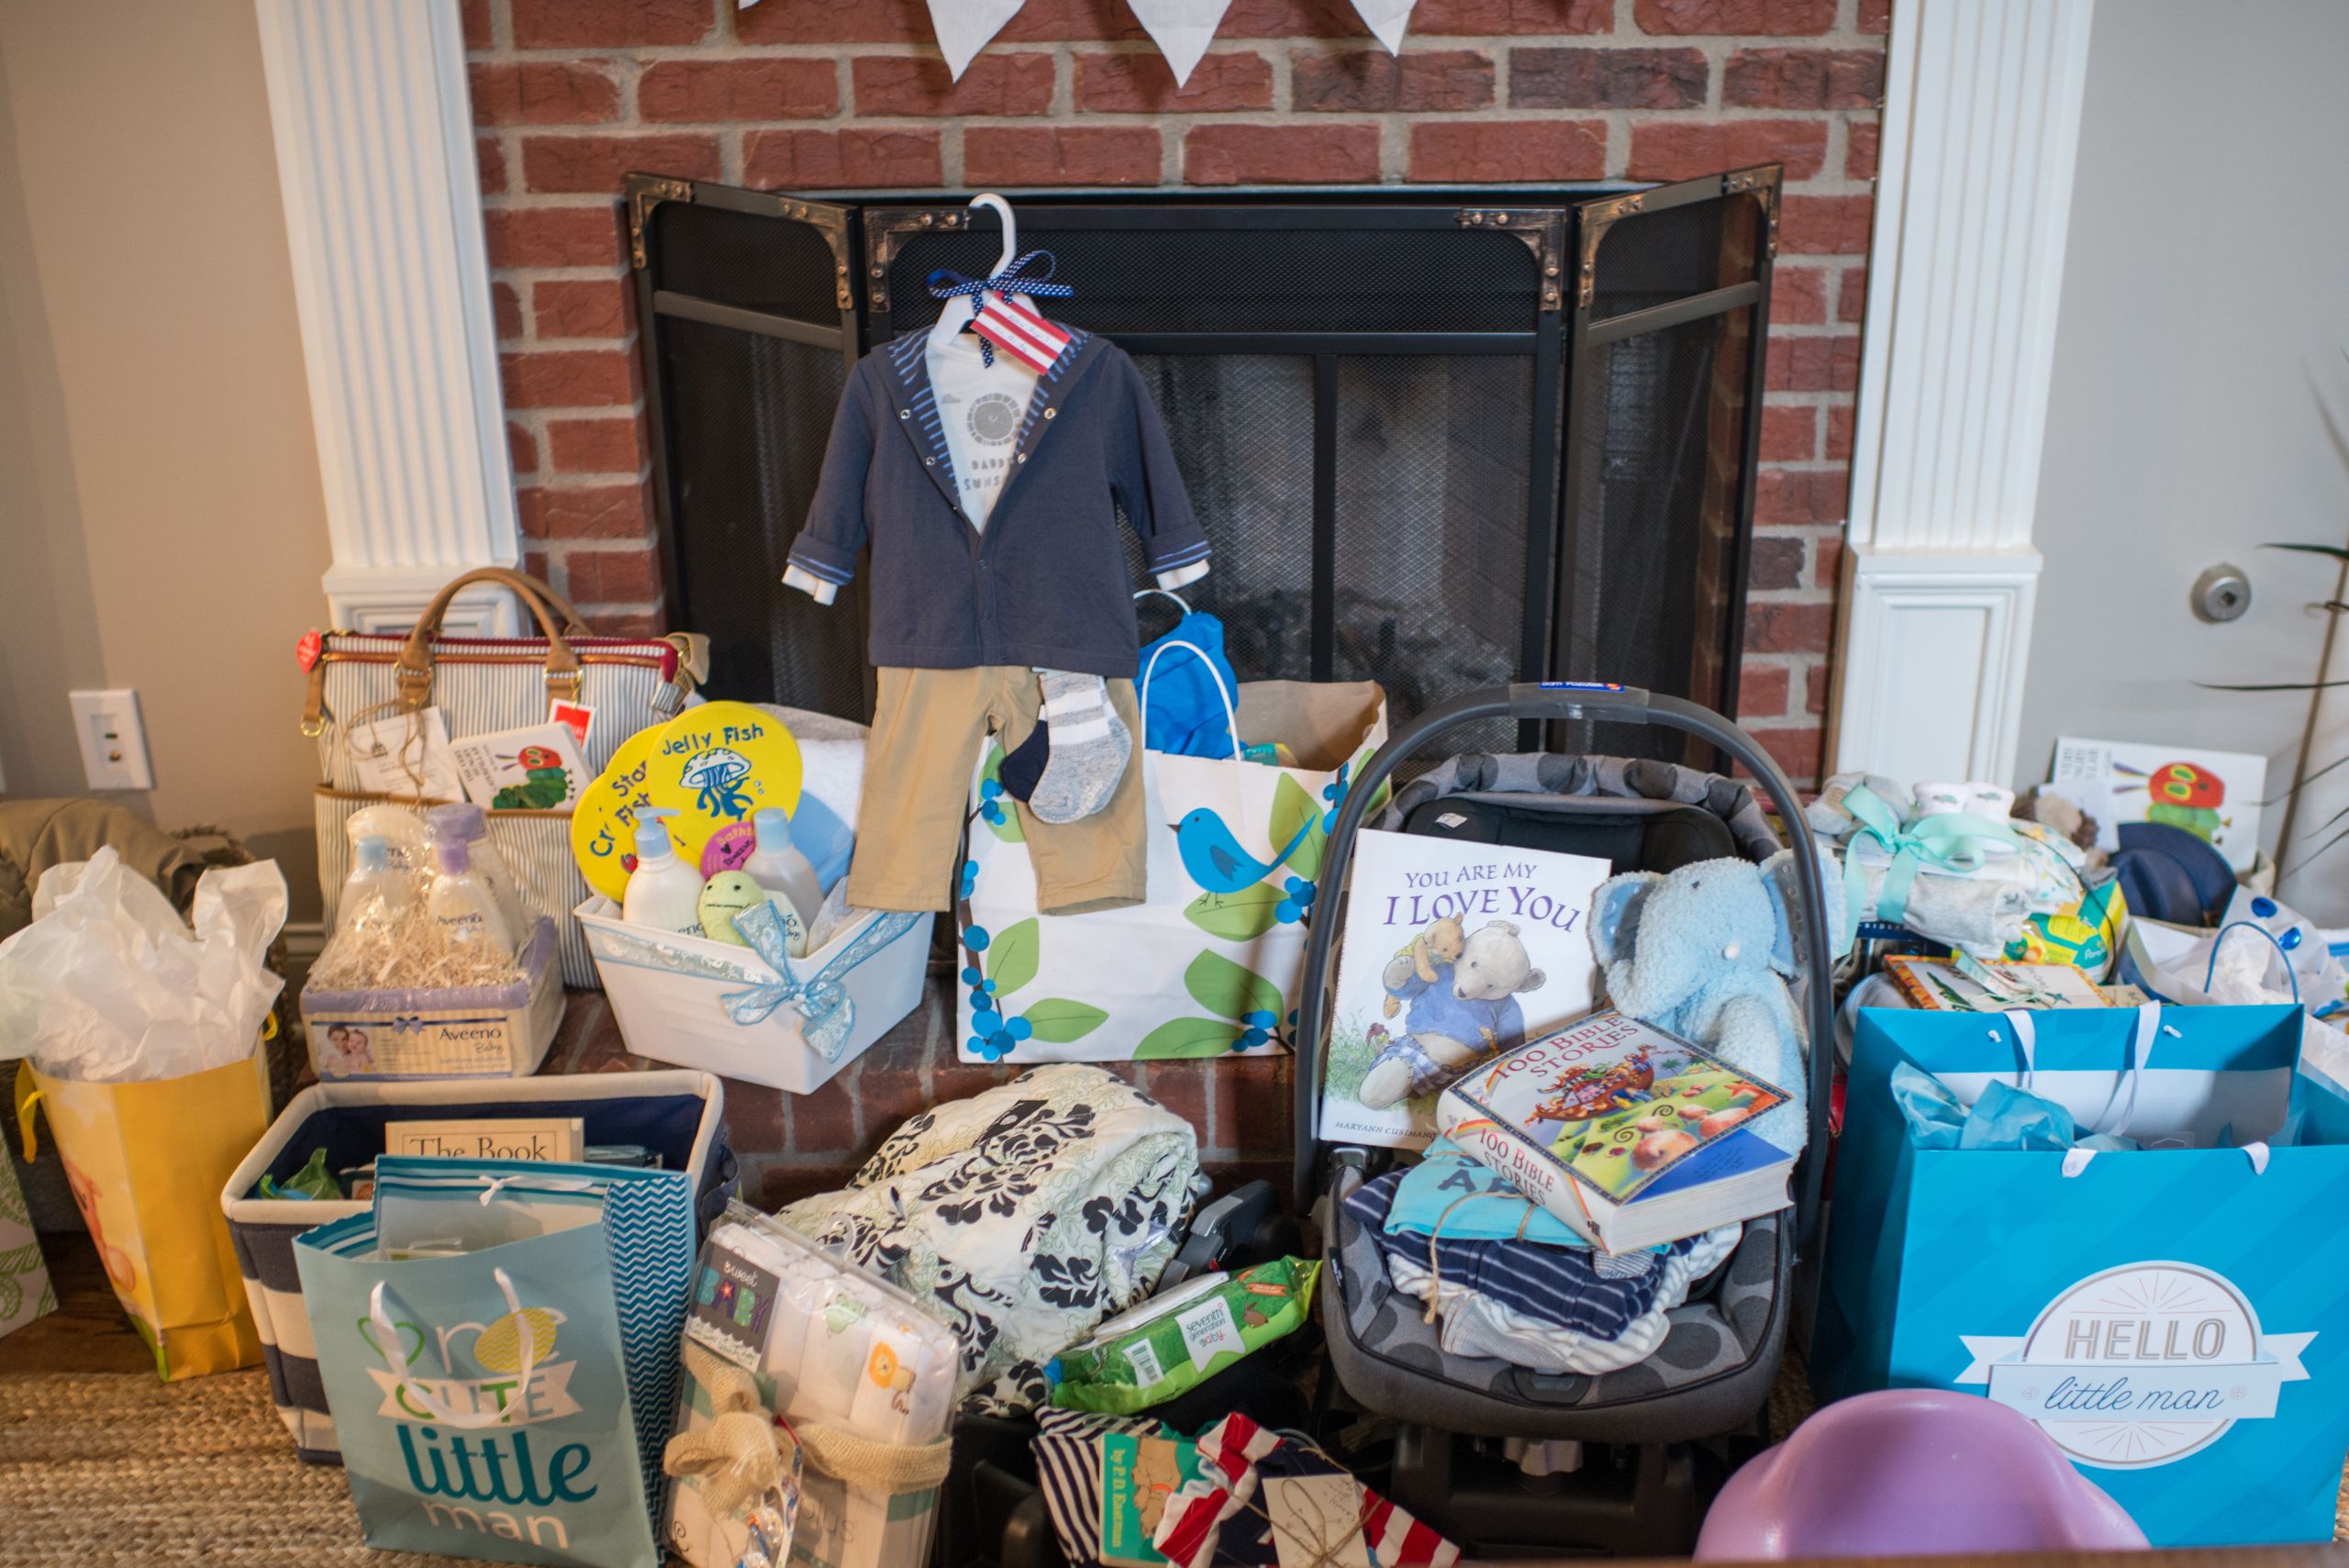 Unwrapped Gifts At Baby Shower
 Couples Baby Shower For Sawyer Tate – The Southern Trunk